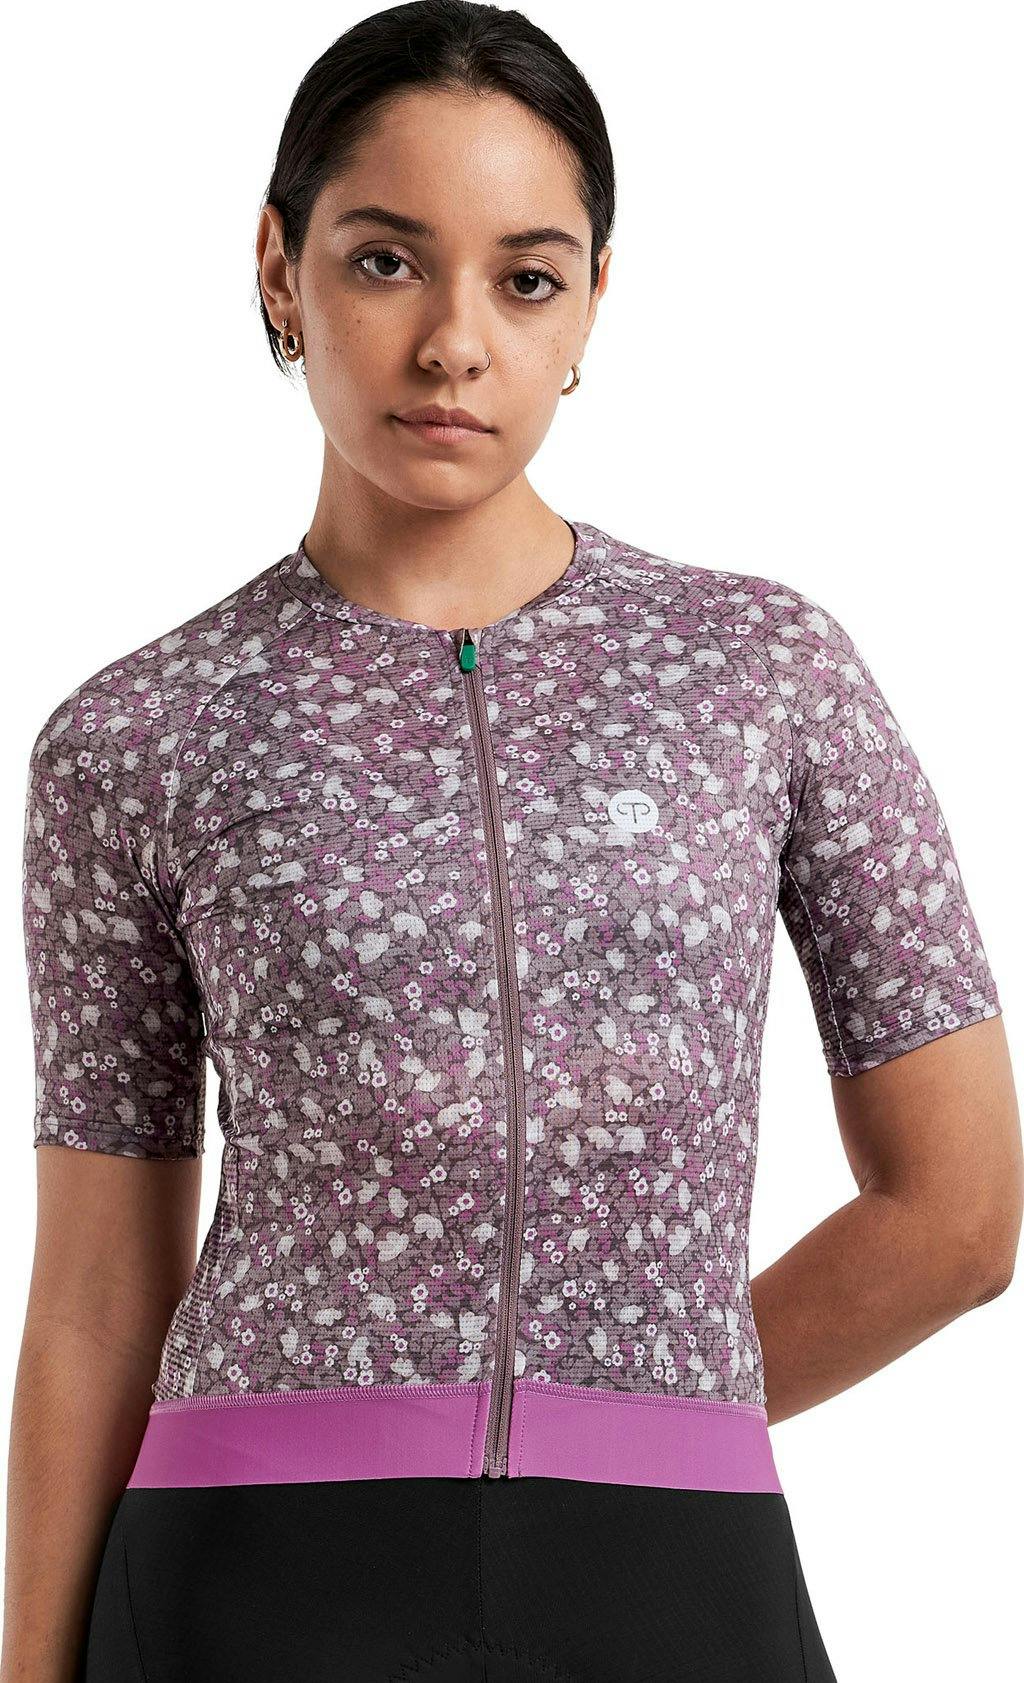 Product image for Signature Lightweight Jersey - Women’s